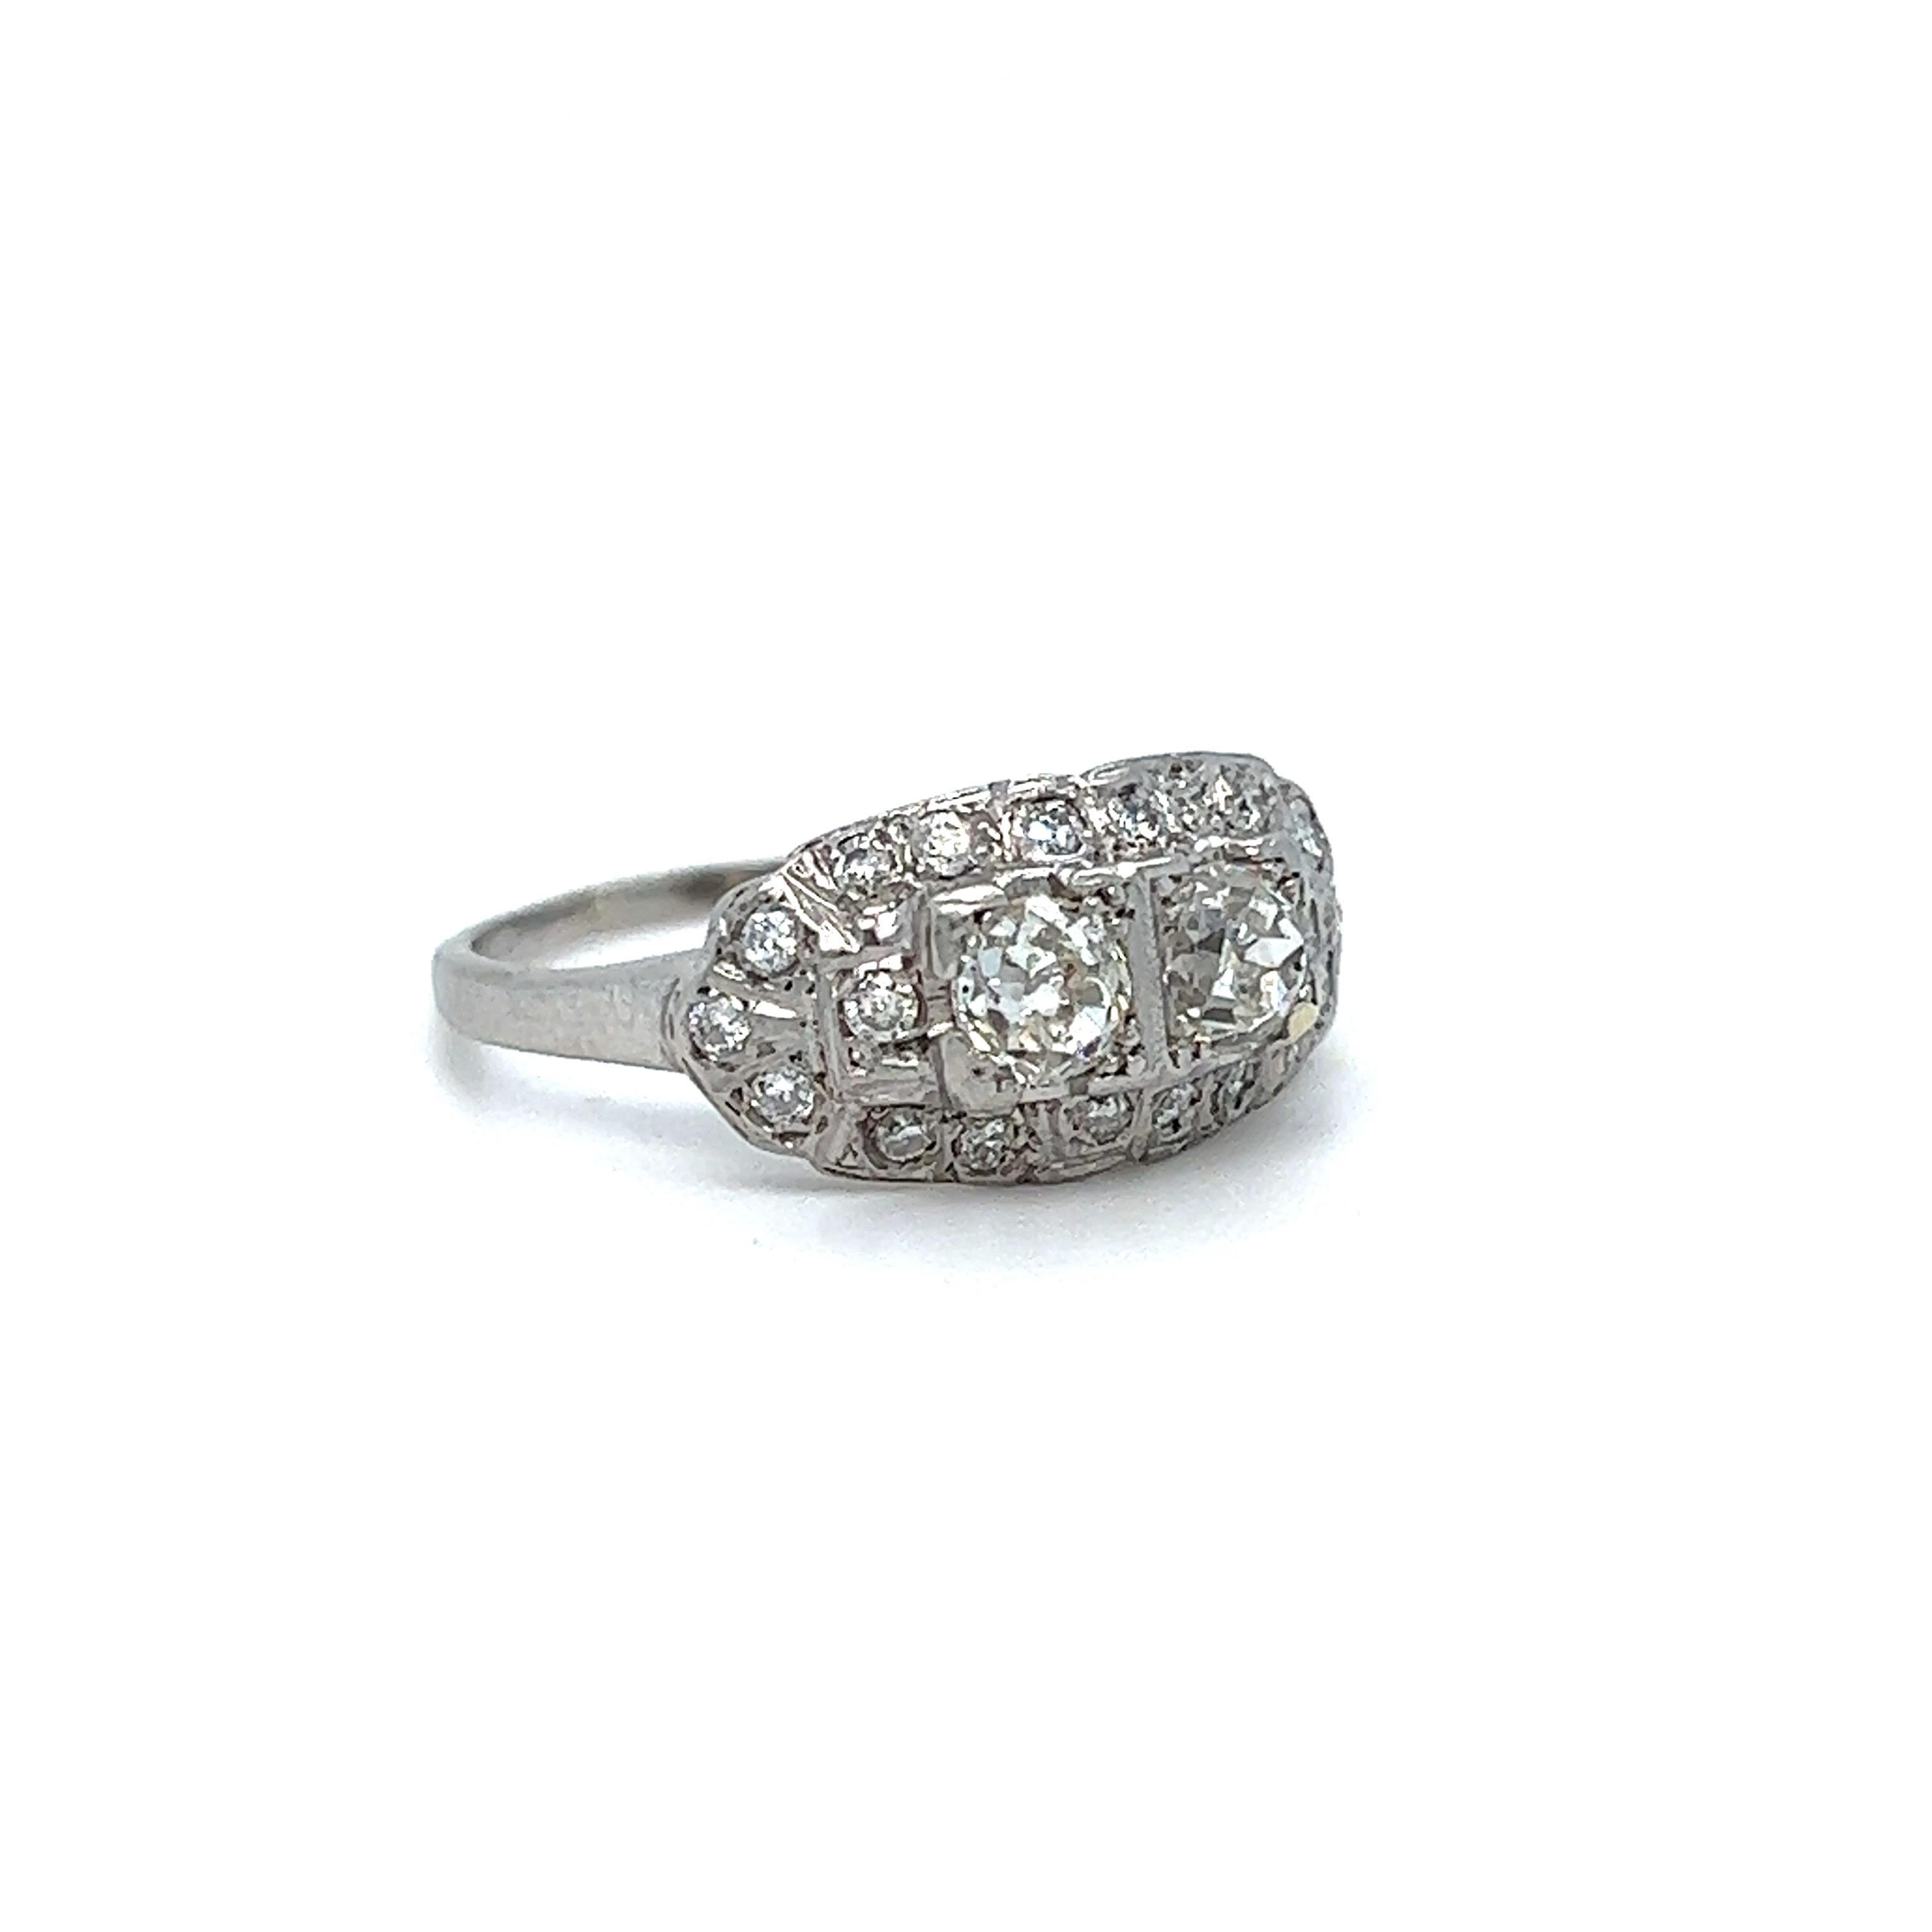 So so gorgeous! I just love this Gorgeous Art Deco Vintage Platinum Diamond Twin Stone/ Toi et Moi Ring - this sparkly antique is really a sight to behold! Crafted in Platinum, this classic antique style of ring holds Two Gorgeous Antique Chunky Old